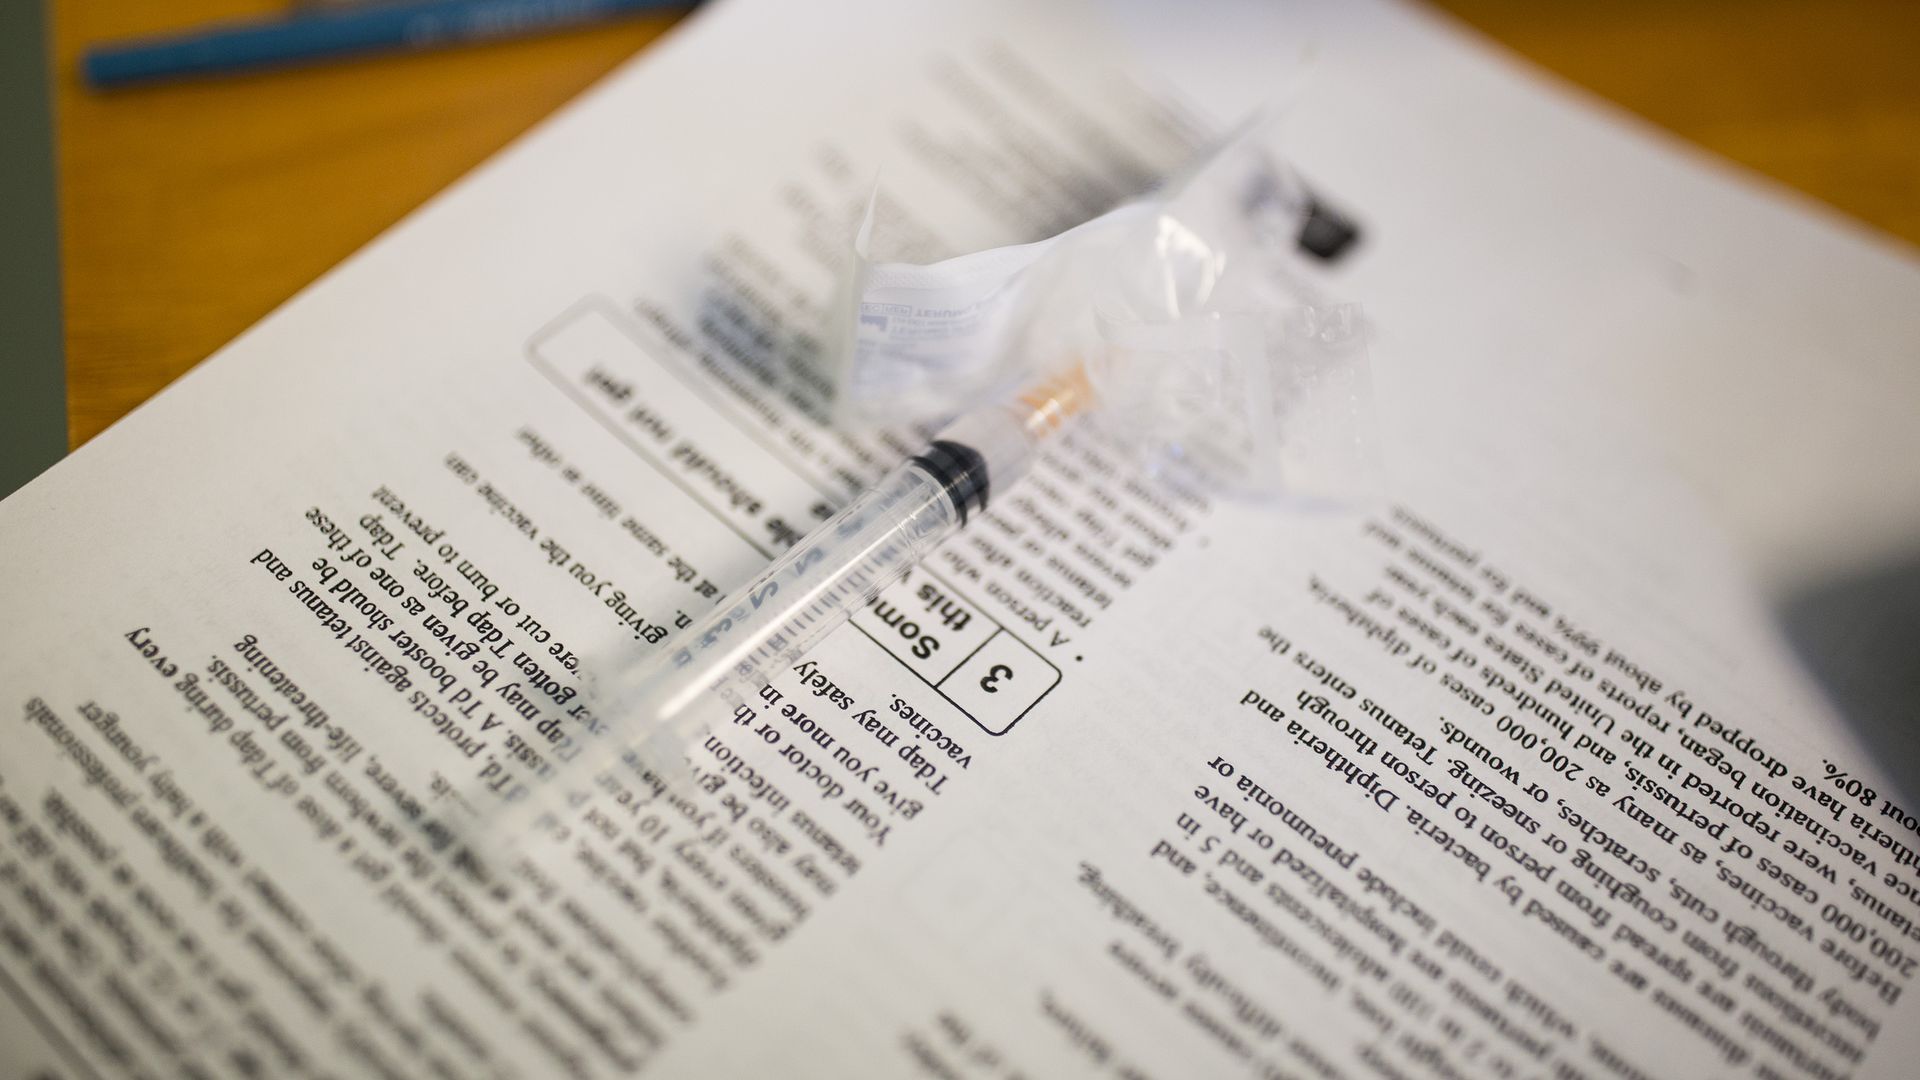 In this image, a syringe is place don top of a sheet of paper.